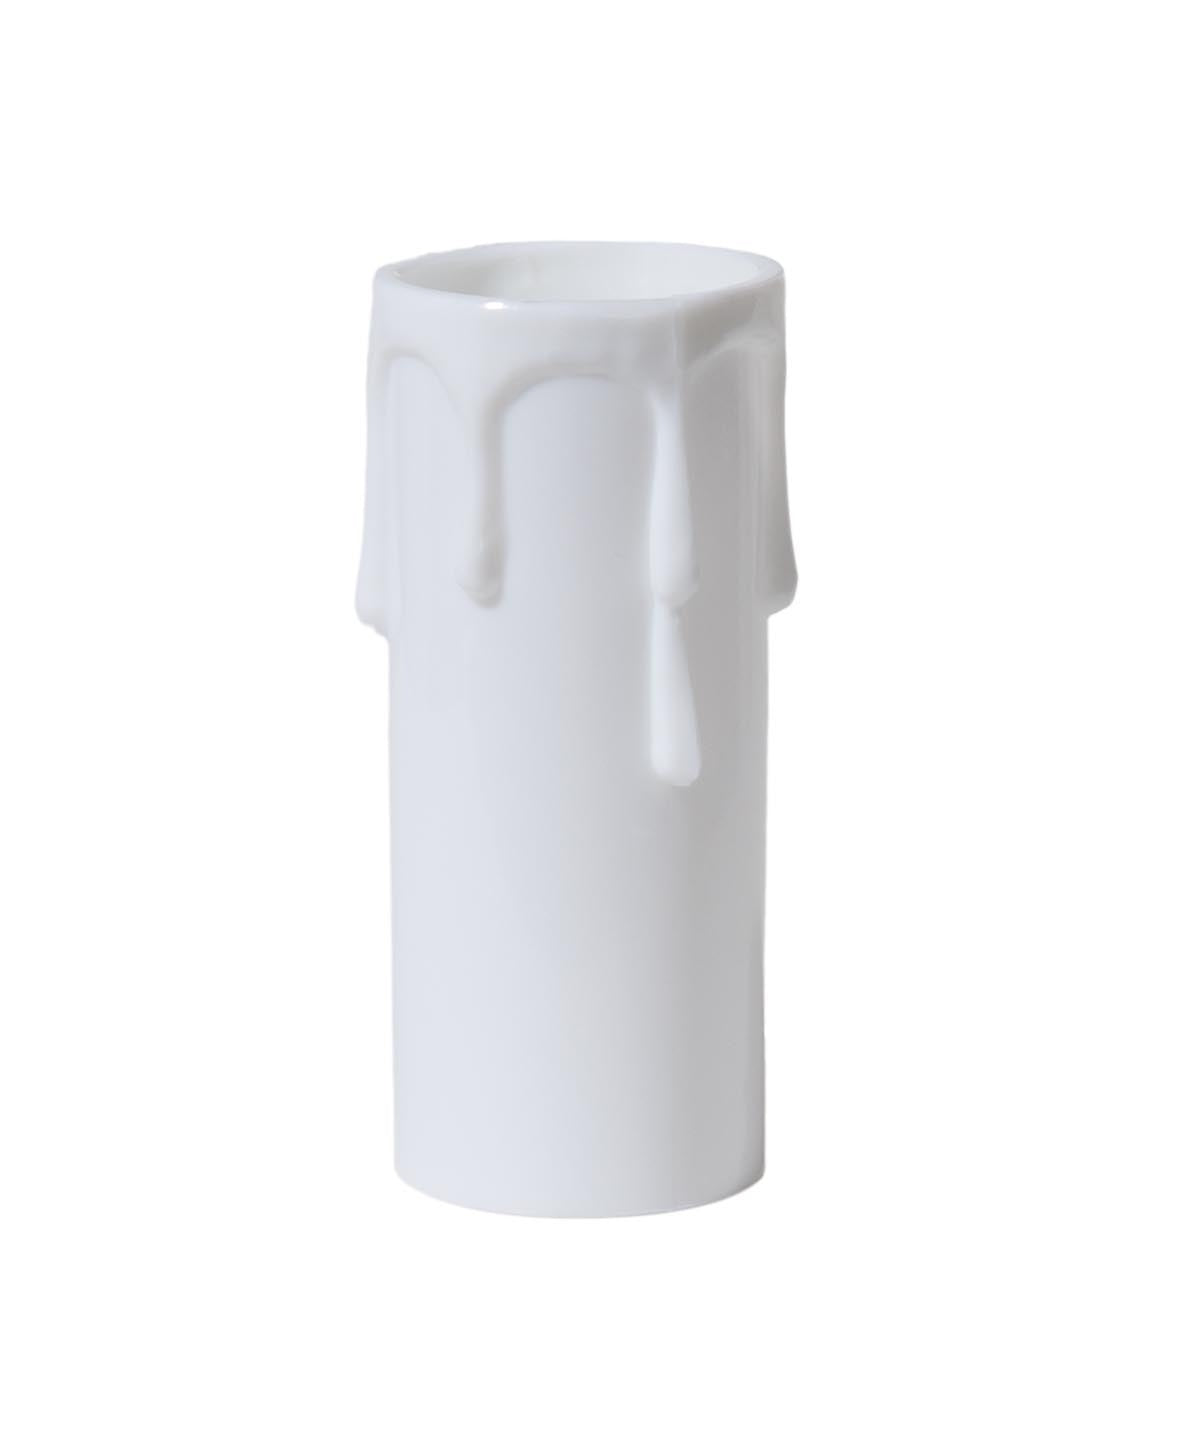 White Color Medium Sized Candle Cover, 3 or 4 Inch Sizes